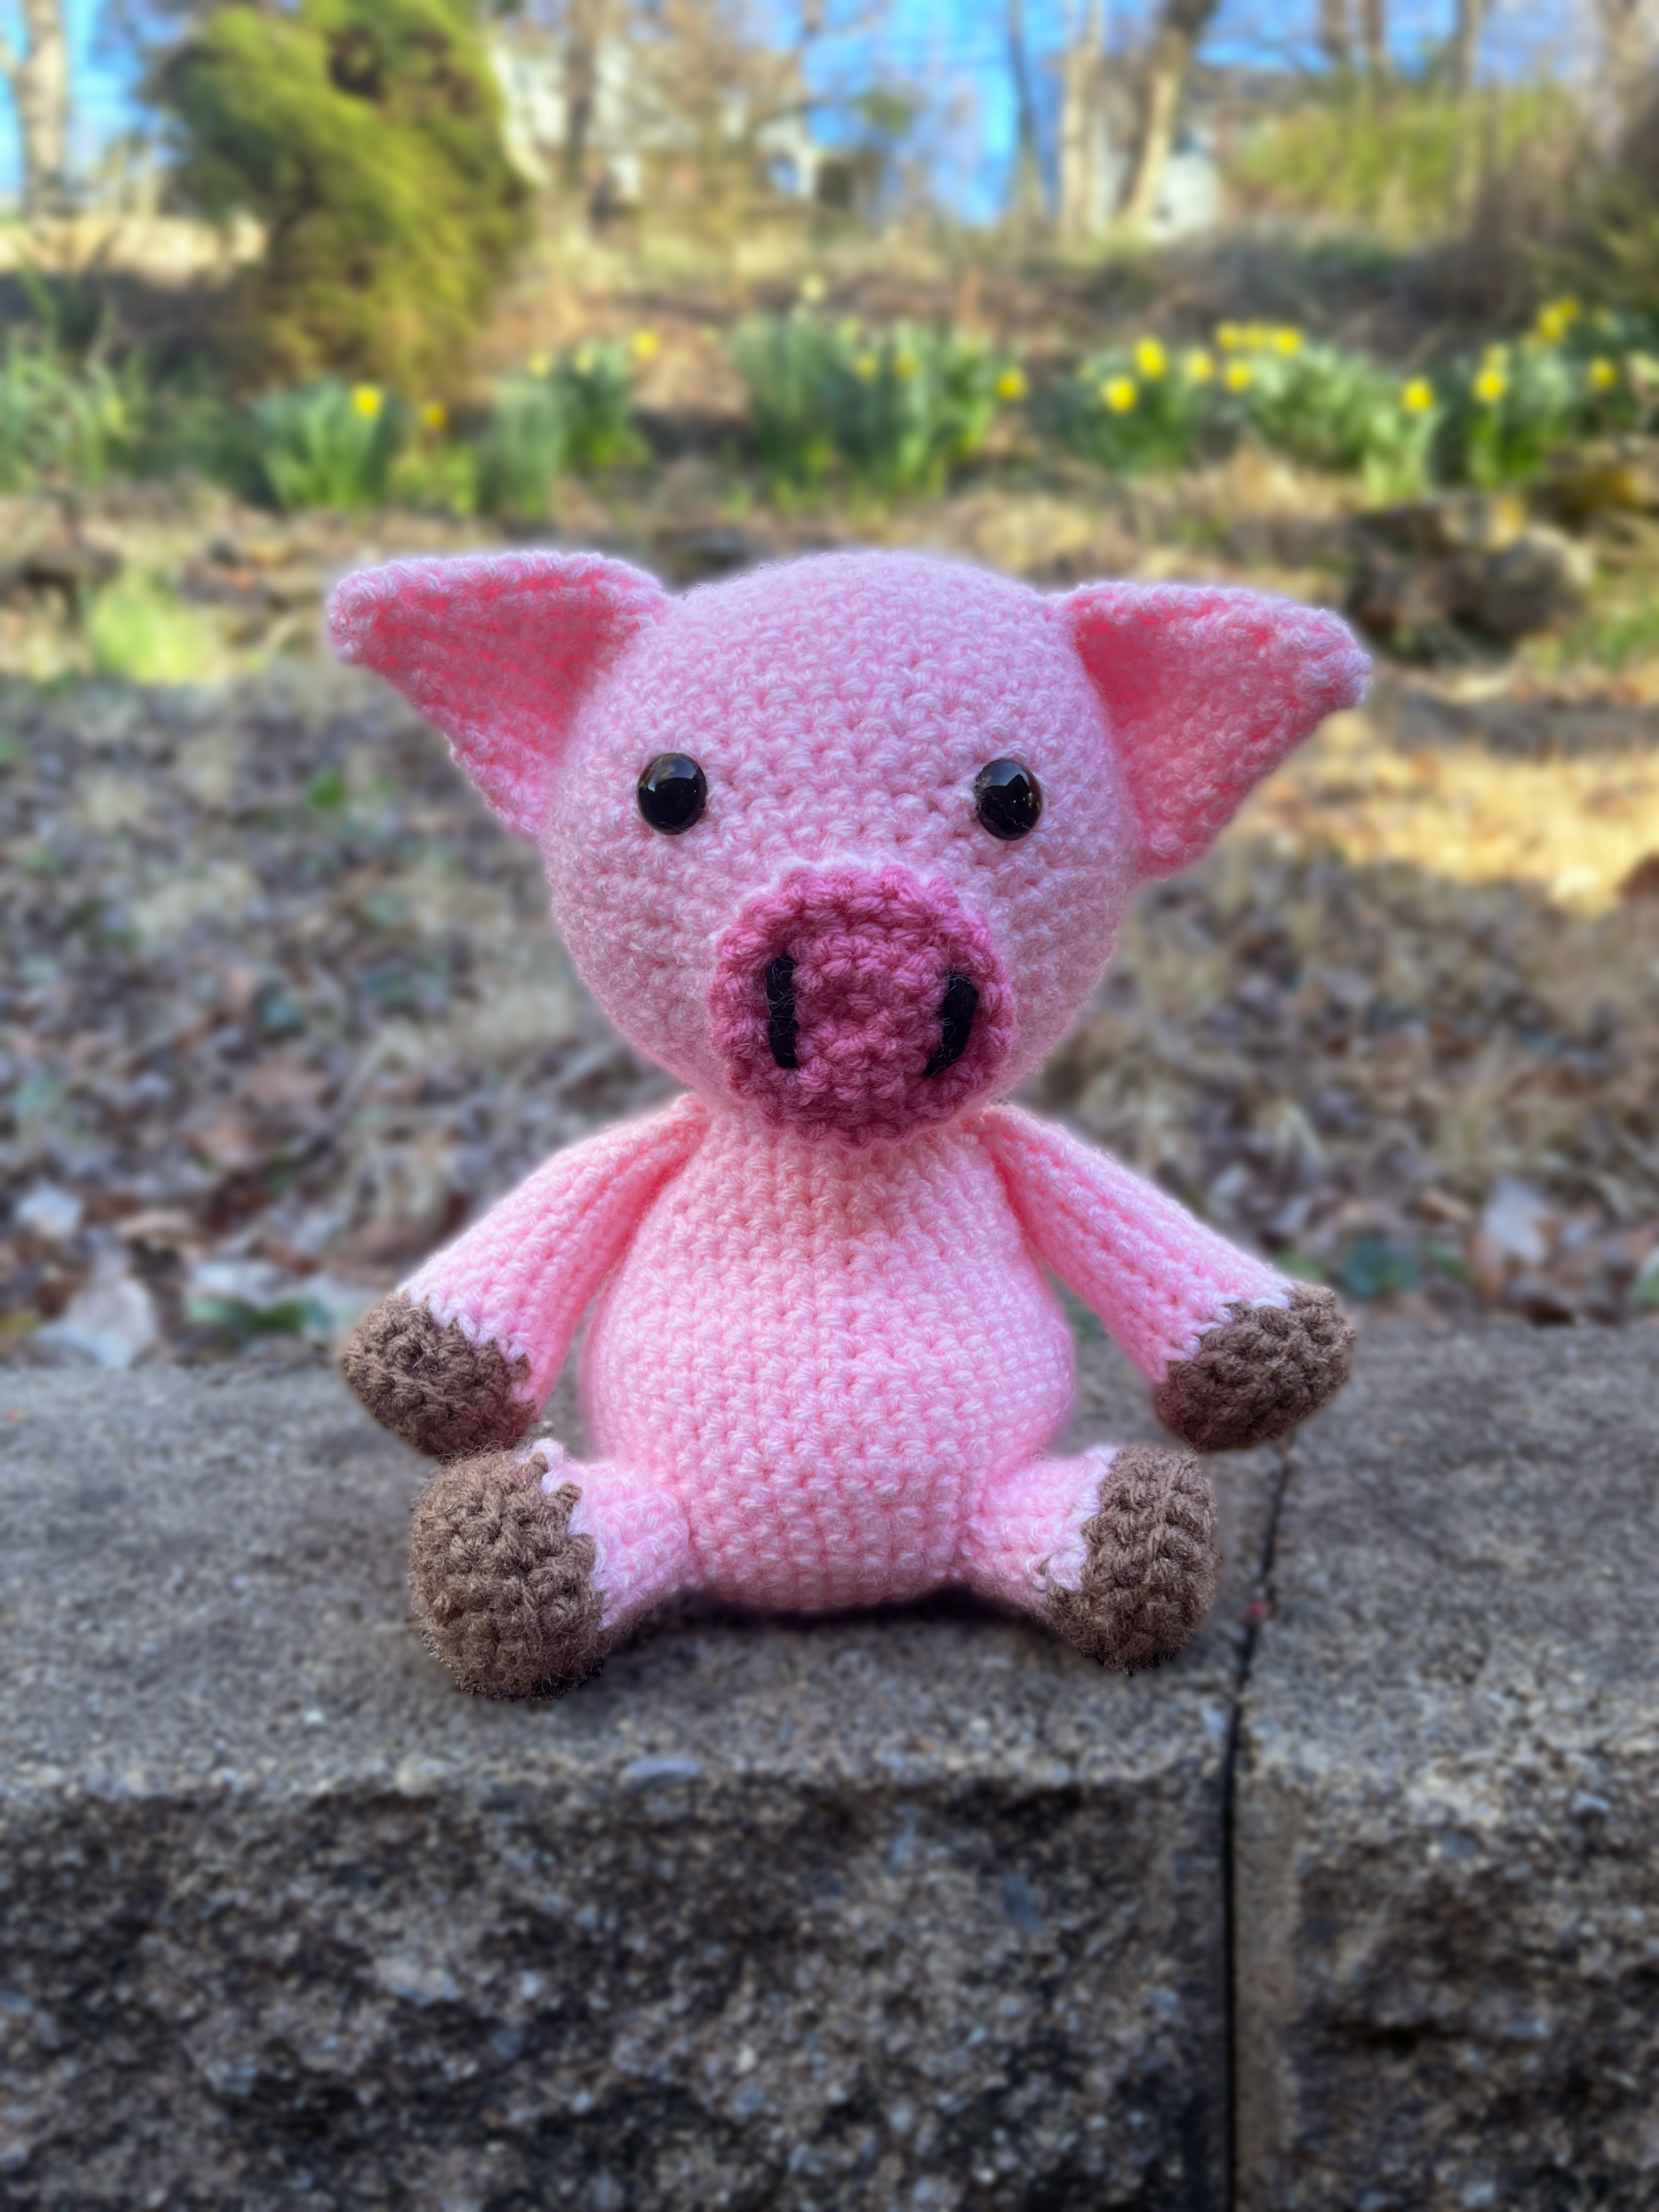 Pink Pig sitting on a stone slab with flowers in background